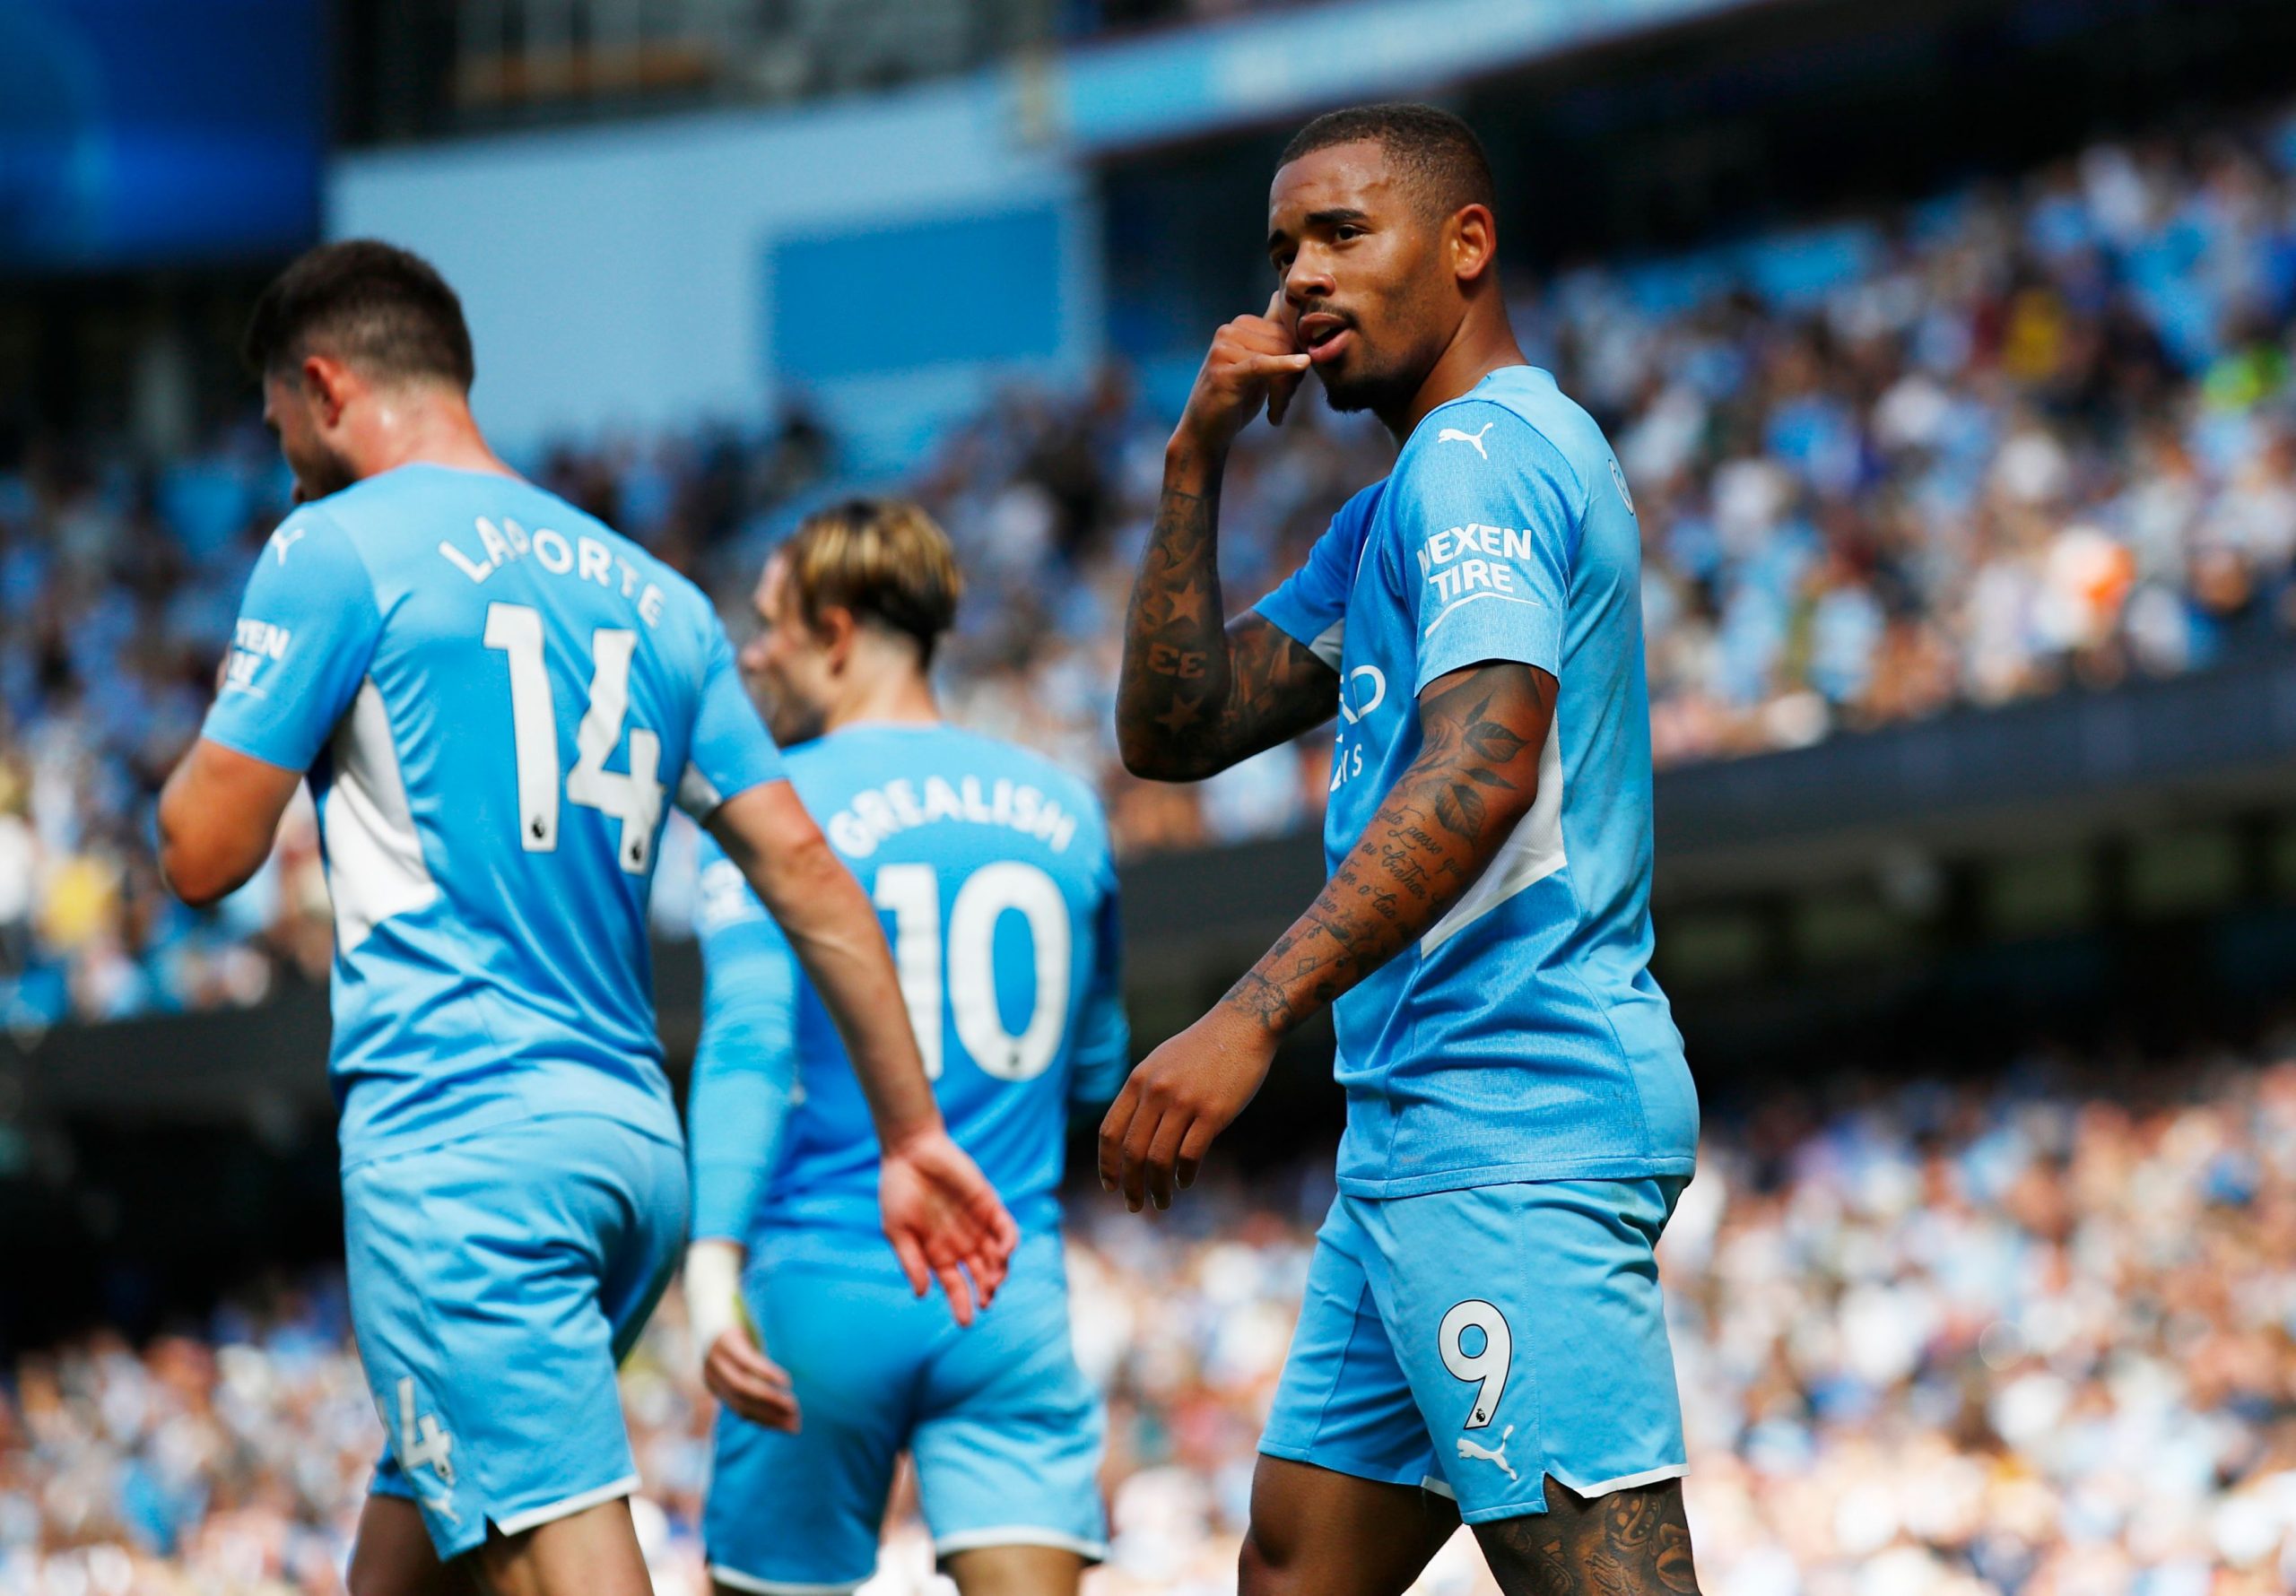 EPL: Manchester City Routs Arsenal 5-0; Liverpool and Chelsea Draw